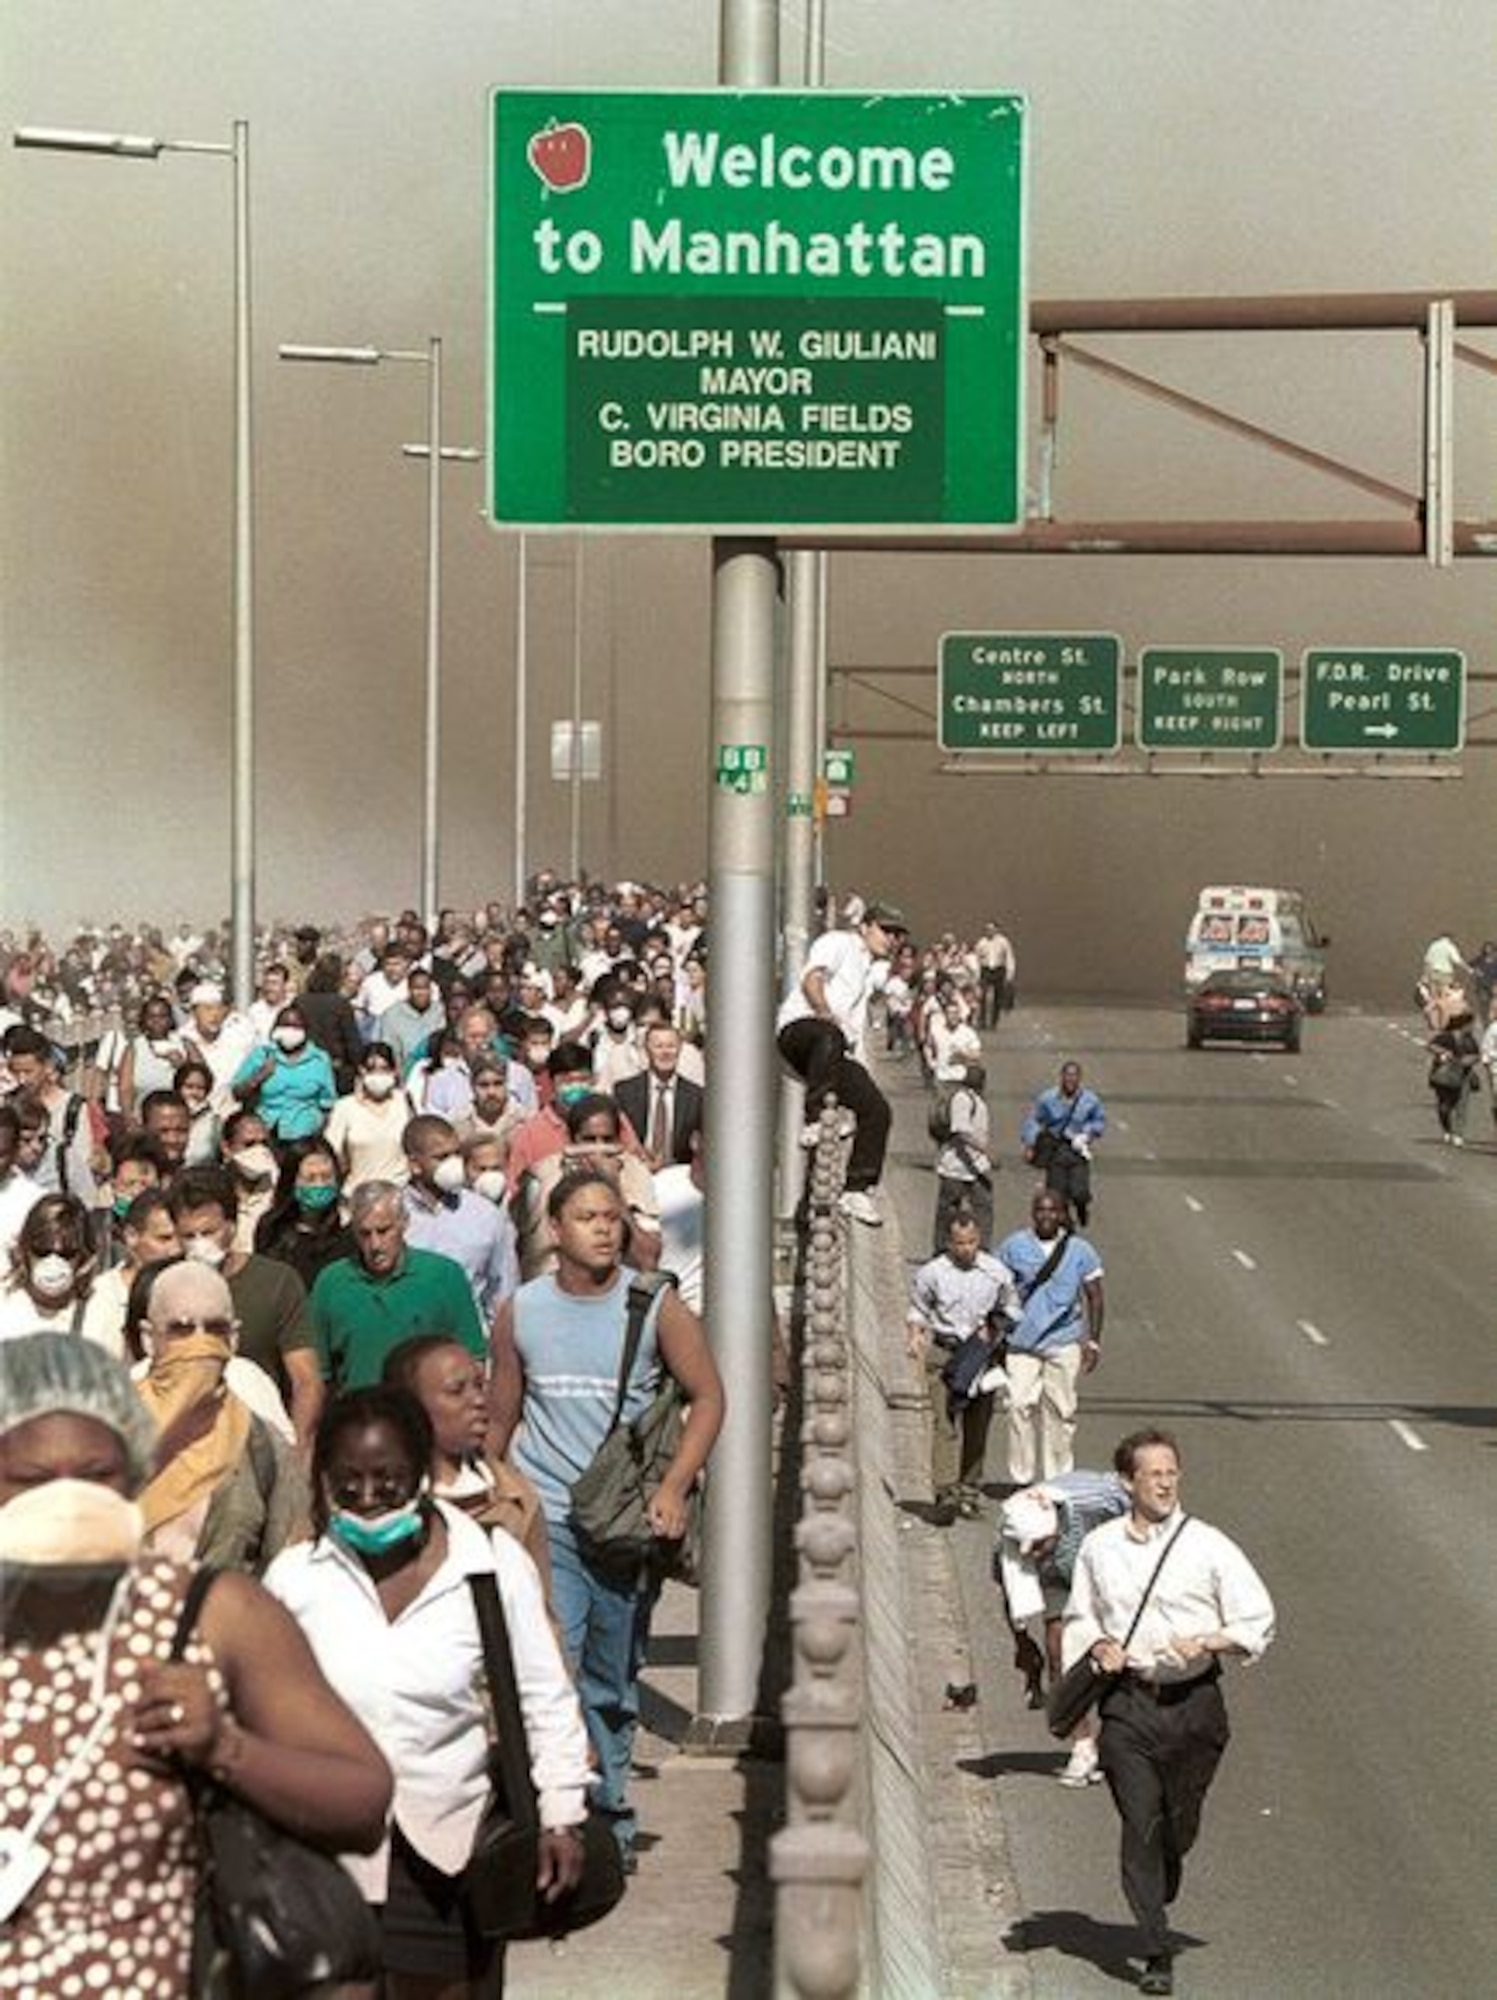 Residents and visitors flee Manhattan via the Brooklyn Bridge, after the Sept. 11, 2001 terrorist attack on the World Trade Center. Since public transportation was disabled, the people were forced to make a mass exodus through a smoky and chaotic city. (AP photo by Daniel Shanken/Released)